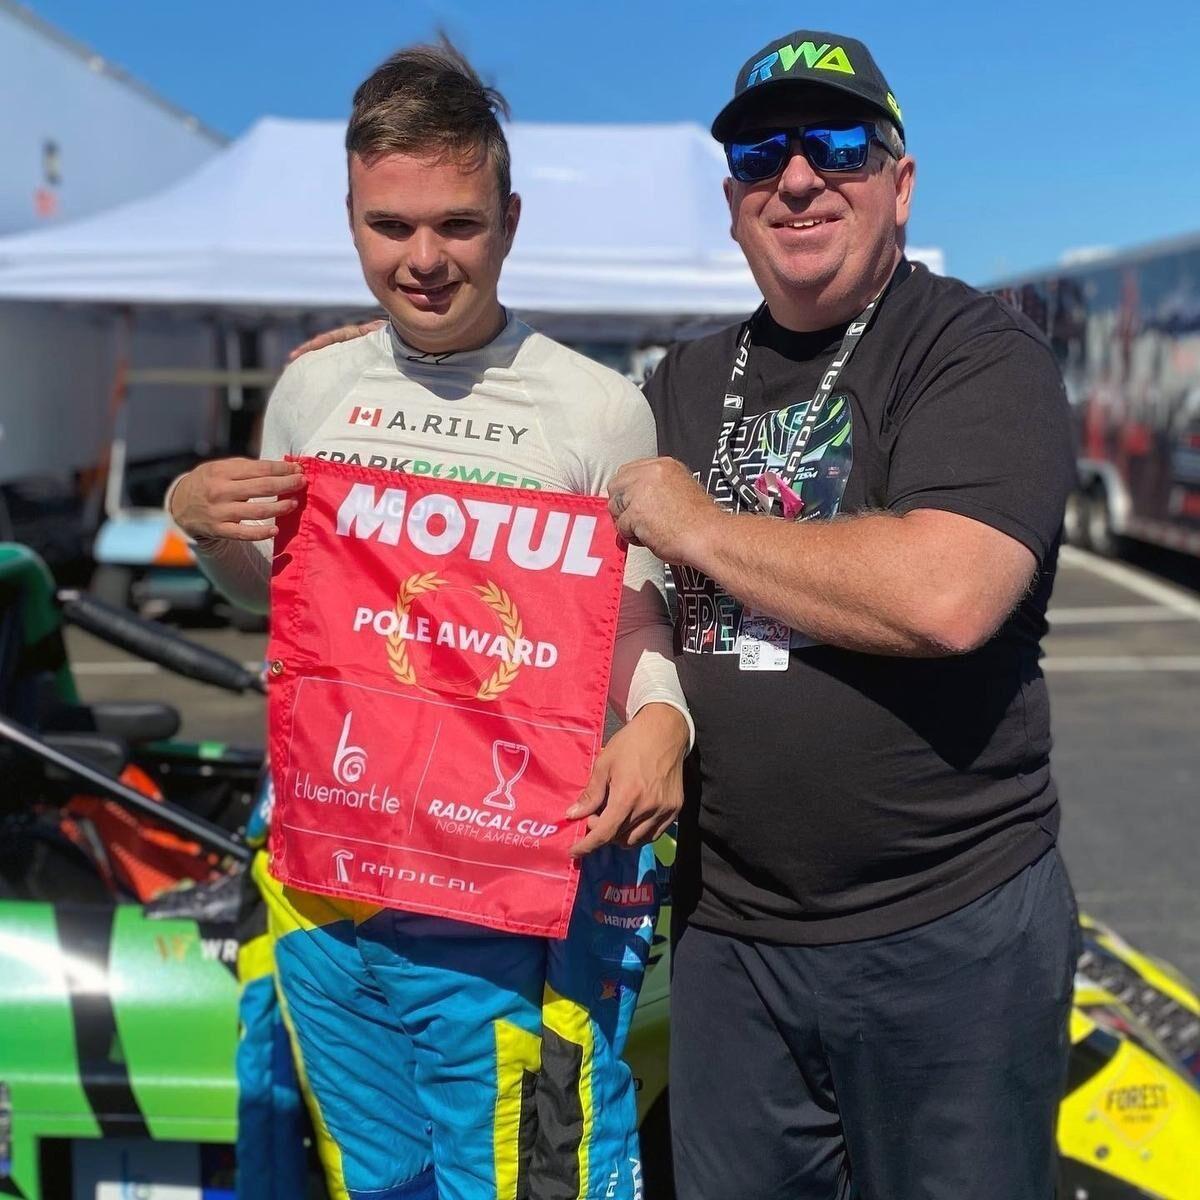 Lindsay Race Car Driver Austin Riley Has A Need For Speed While